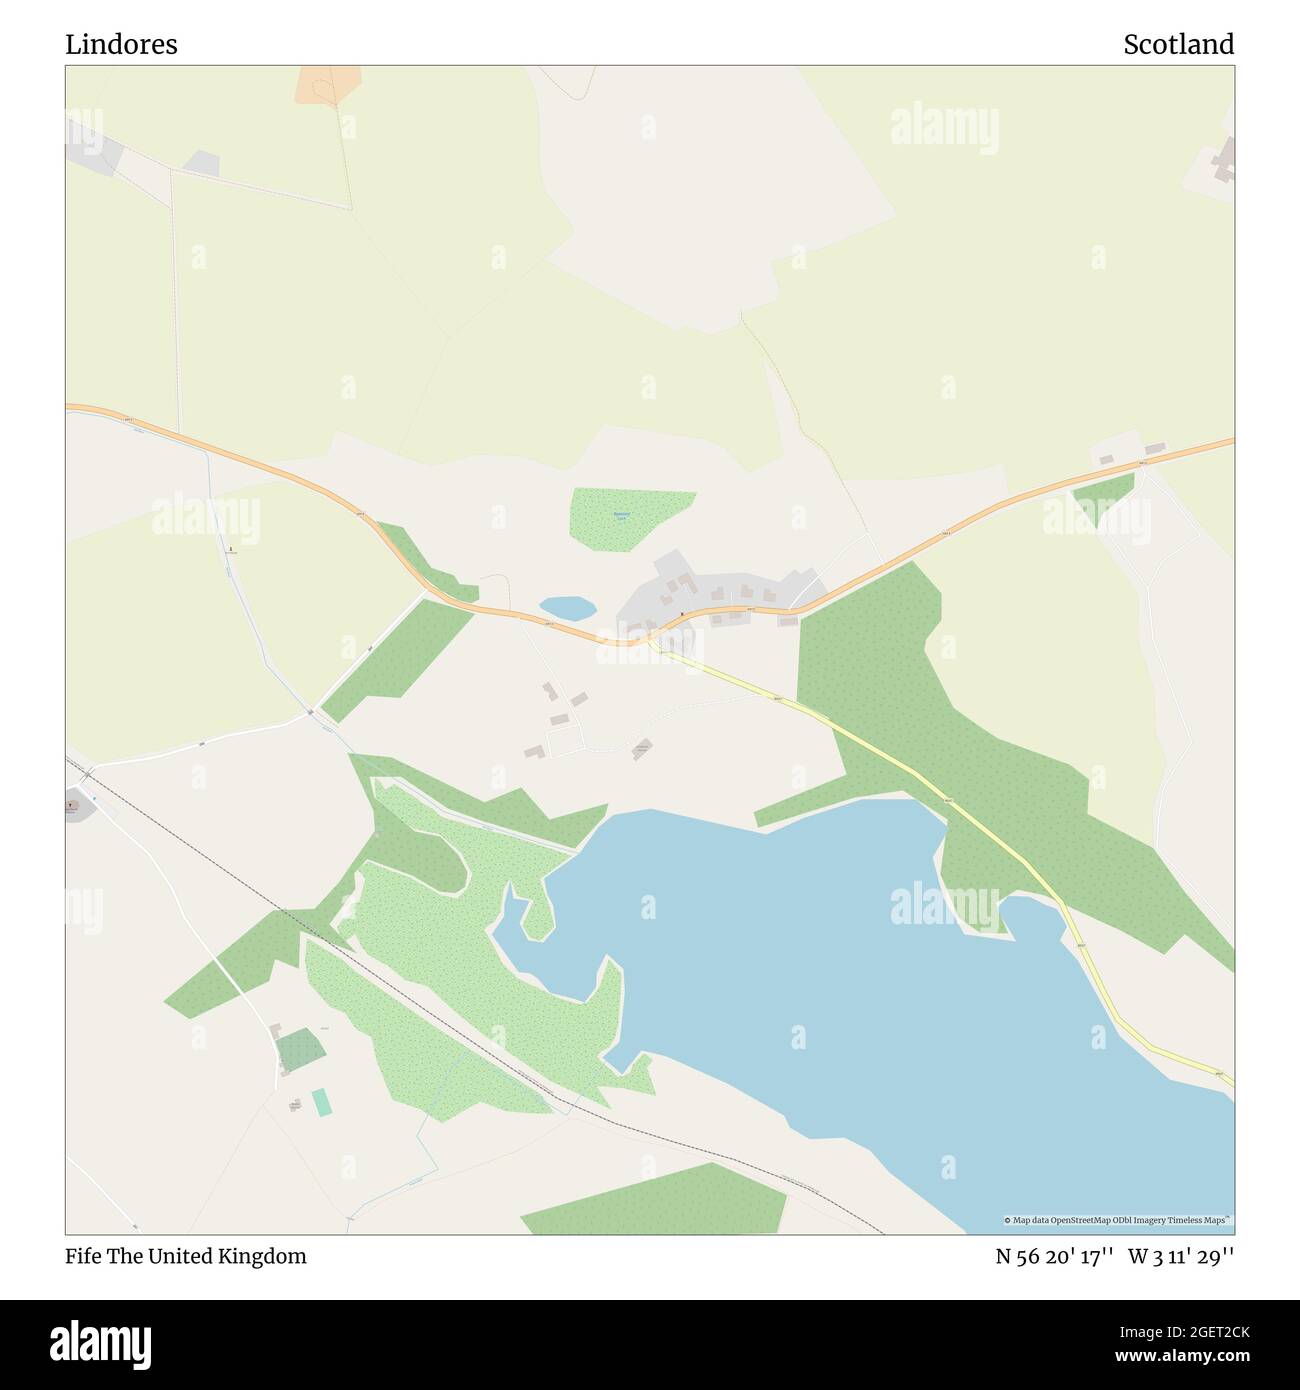 Lindores, Fife, United Kingdom, Scotland, N 56 20' 17'', W 3 11' 29'', map, Timeless Map published in 2021. Travelers, explorers and adventurers like Florence Nightingale, David Livingstone, Ernest Shackleton, Lewis and Clark and Sherlock Holmes relied on maps to plan travels to the world's most remote corners, Timeless Maps is mapping most locations on the globe, showing the achievement of great dreams Stock Photo